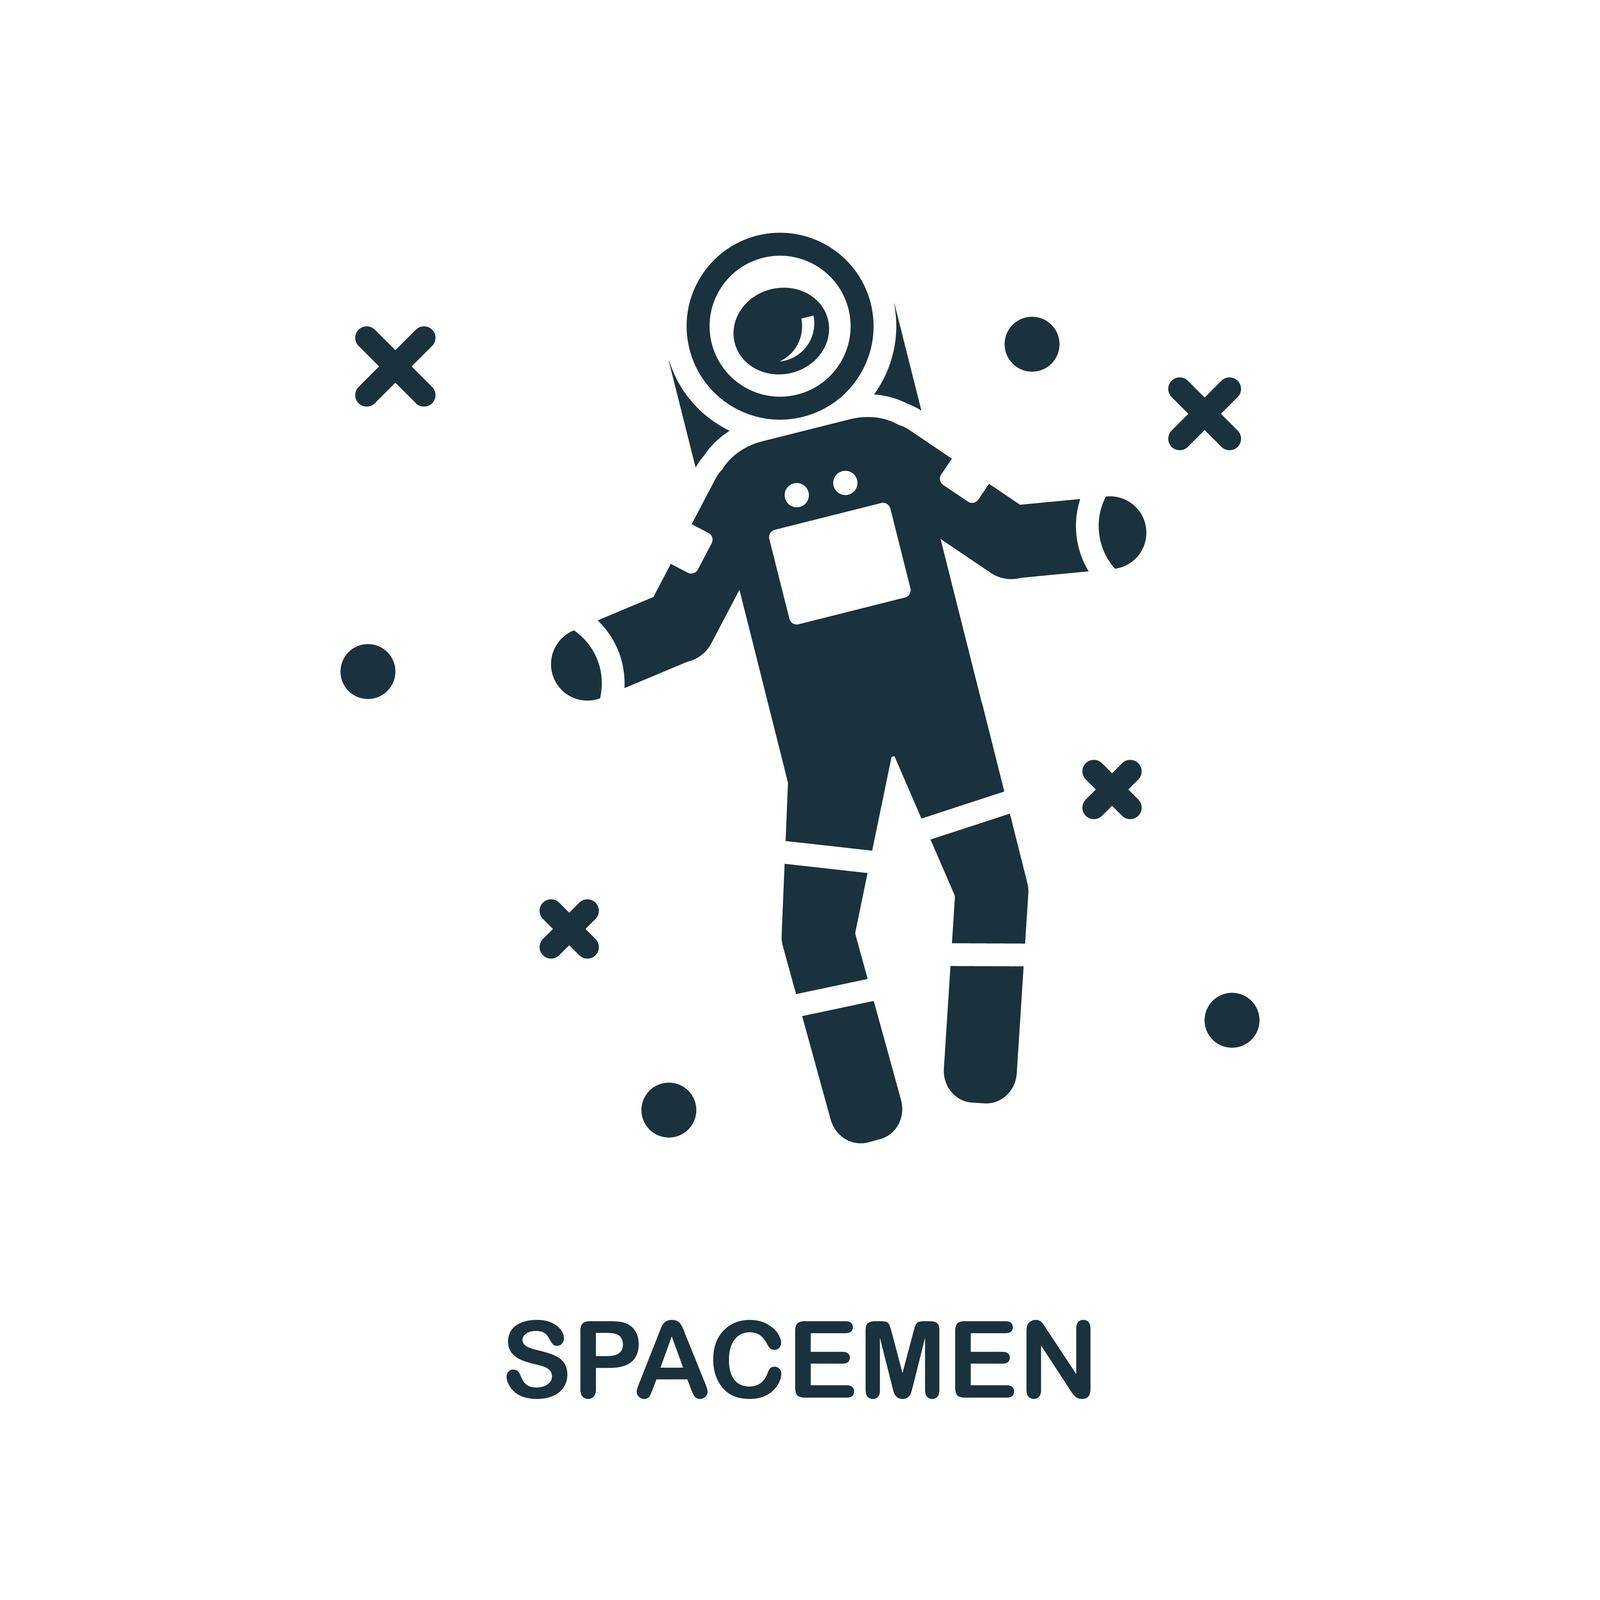 Spacemen icon. Monochrome sign from space collection. Creative Spacemen icon illustration for web design, infographics and more by simakovavector